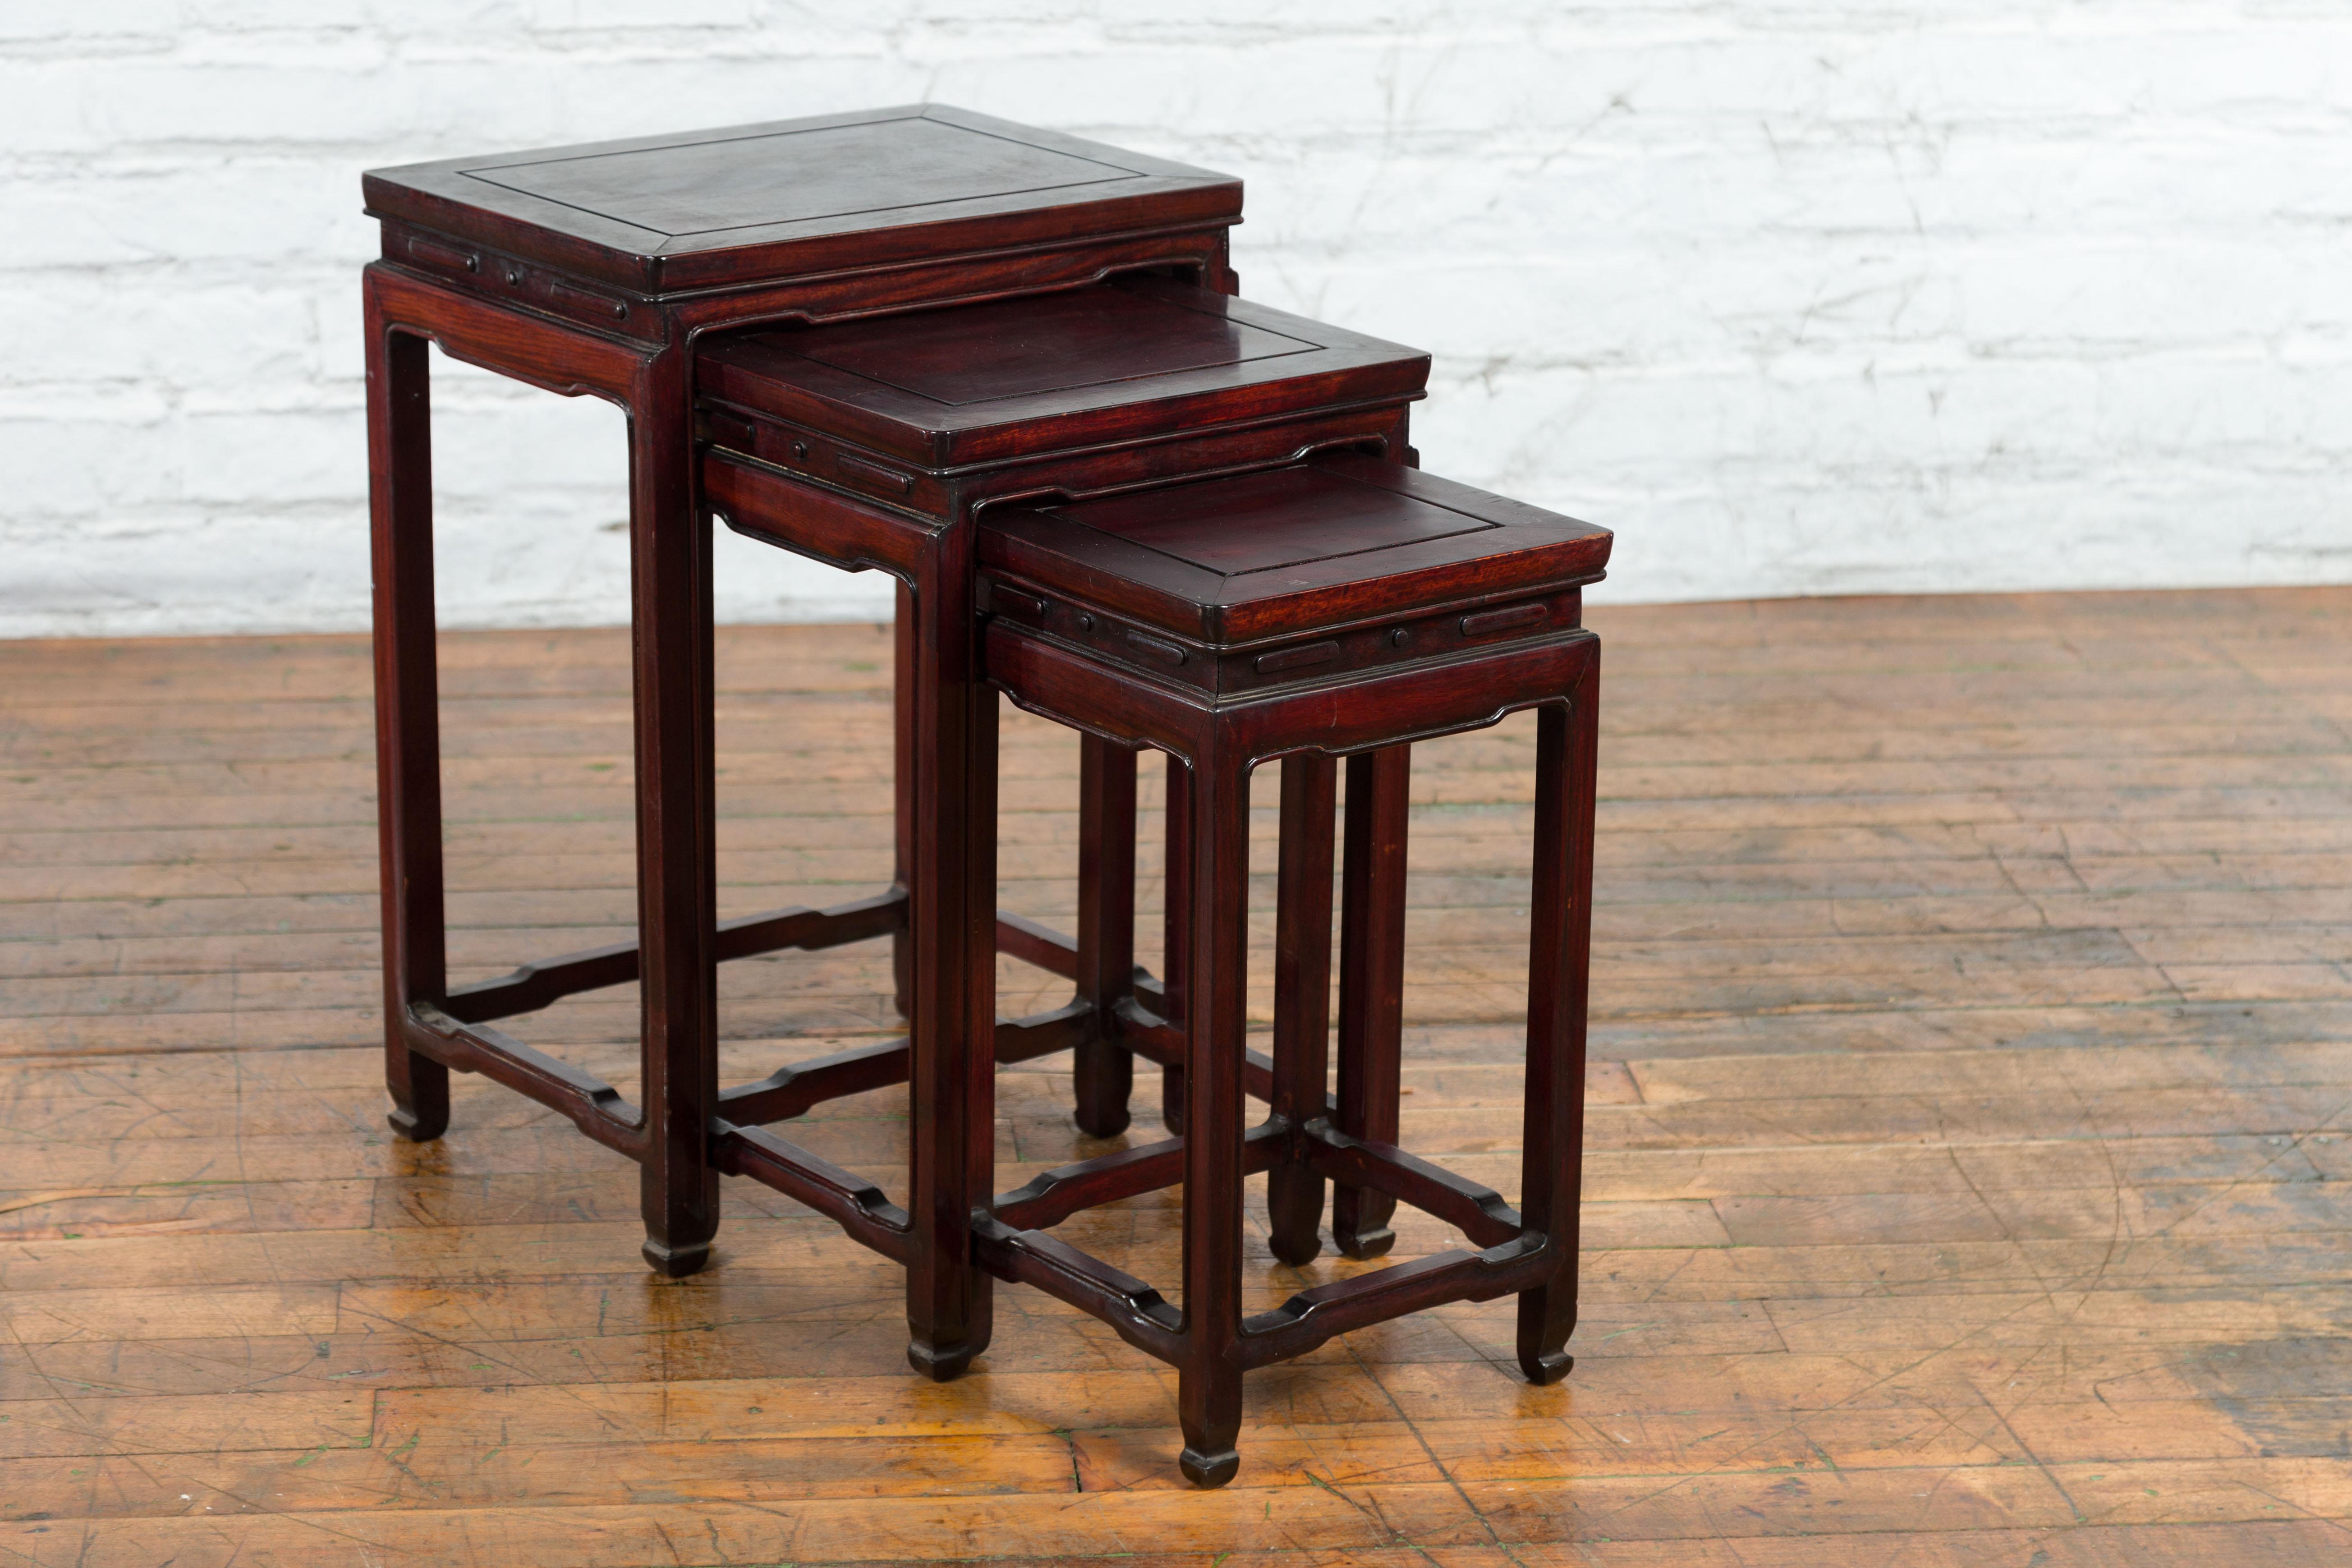 Set of Three Chinese Vintage Rosewood Nesting Tables with Reddish Brown Patina In Good Condition For Sale In Yonkers, NY